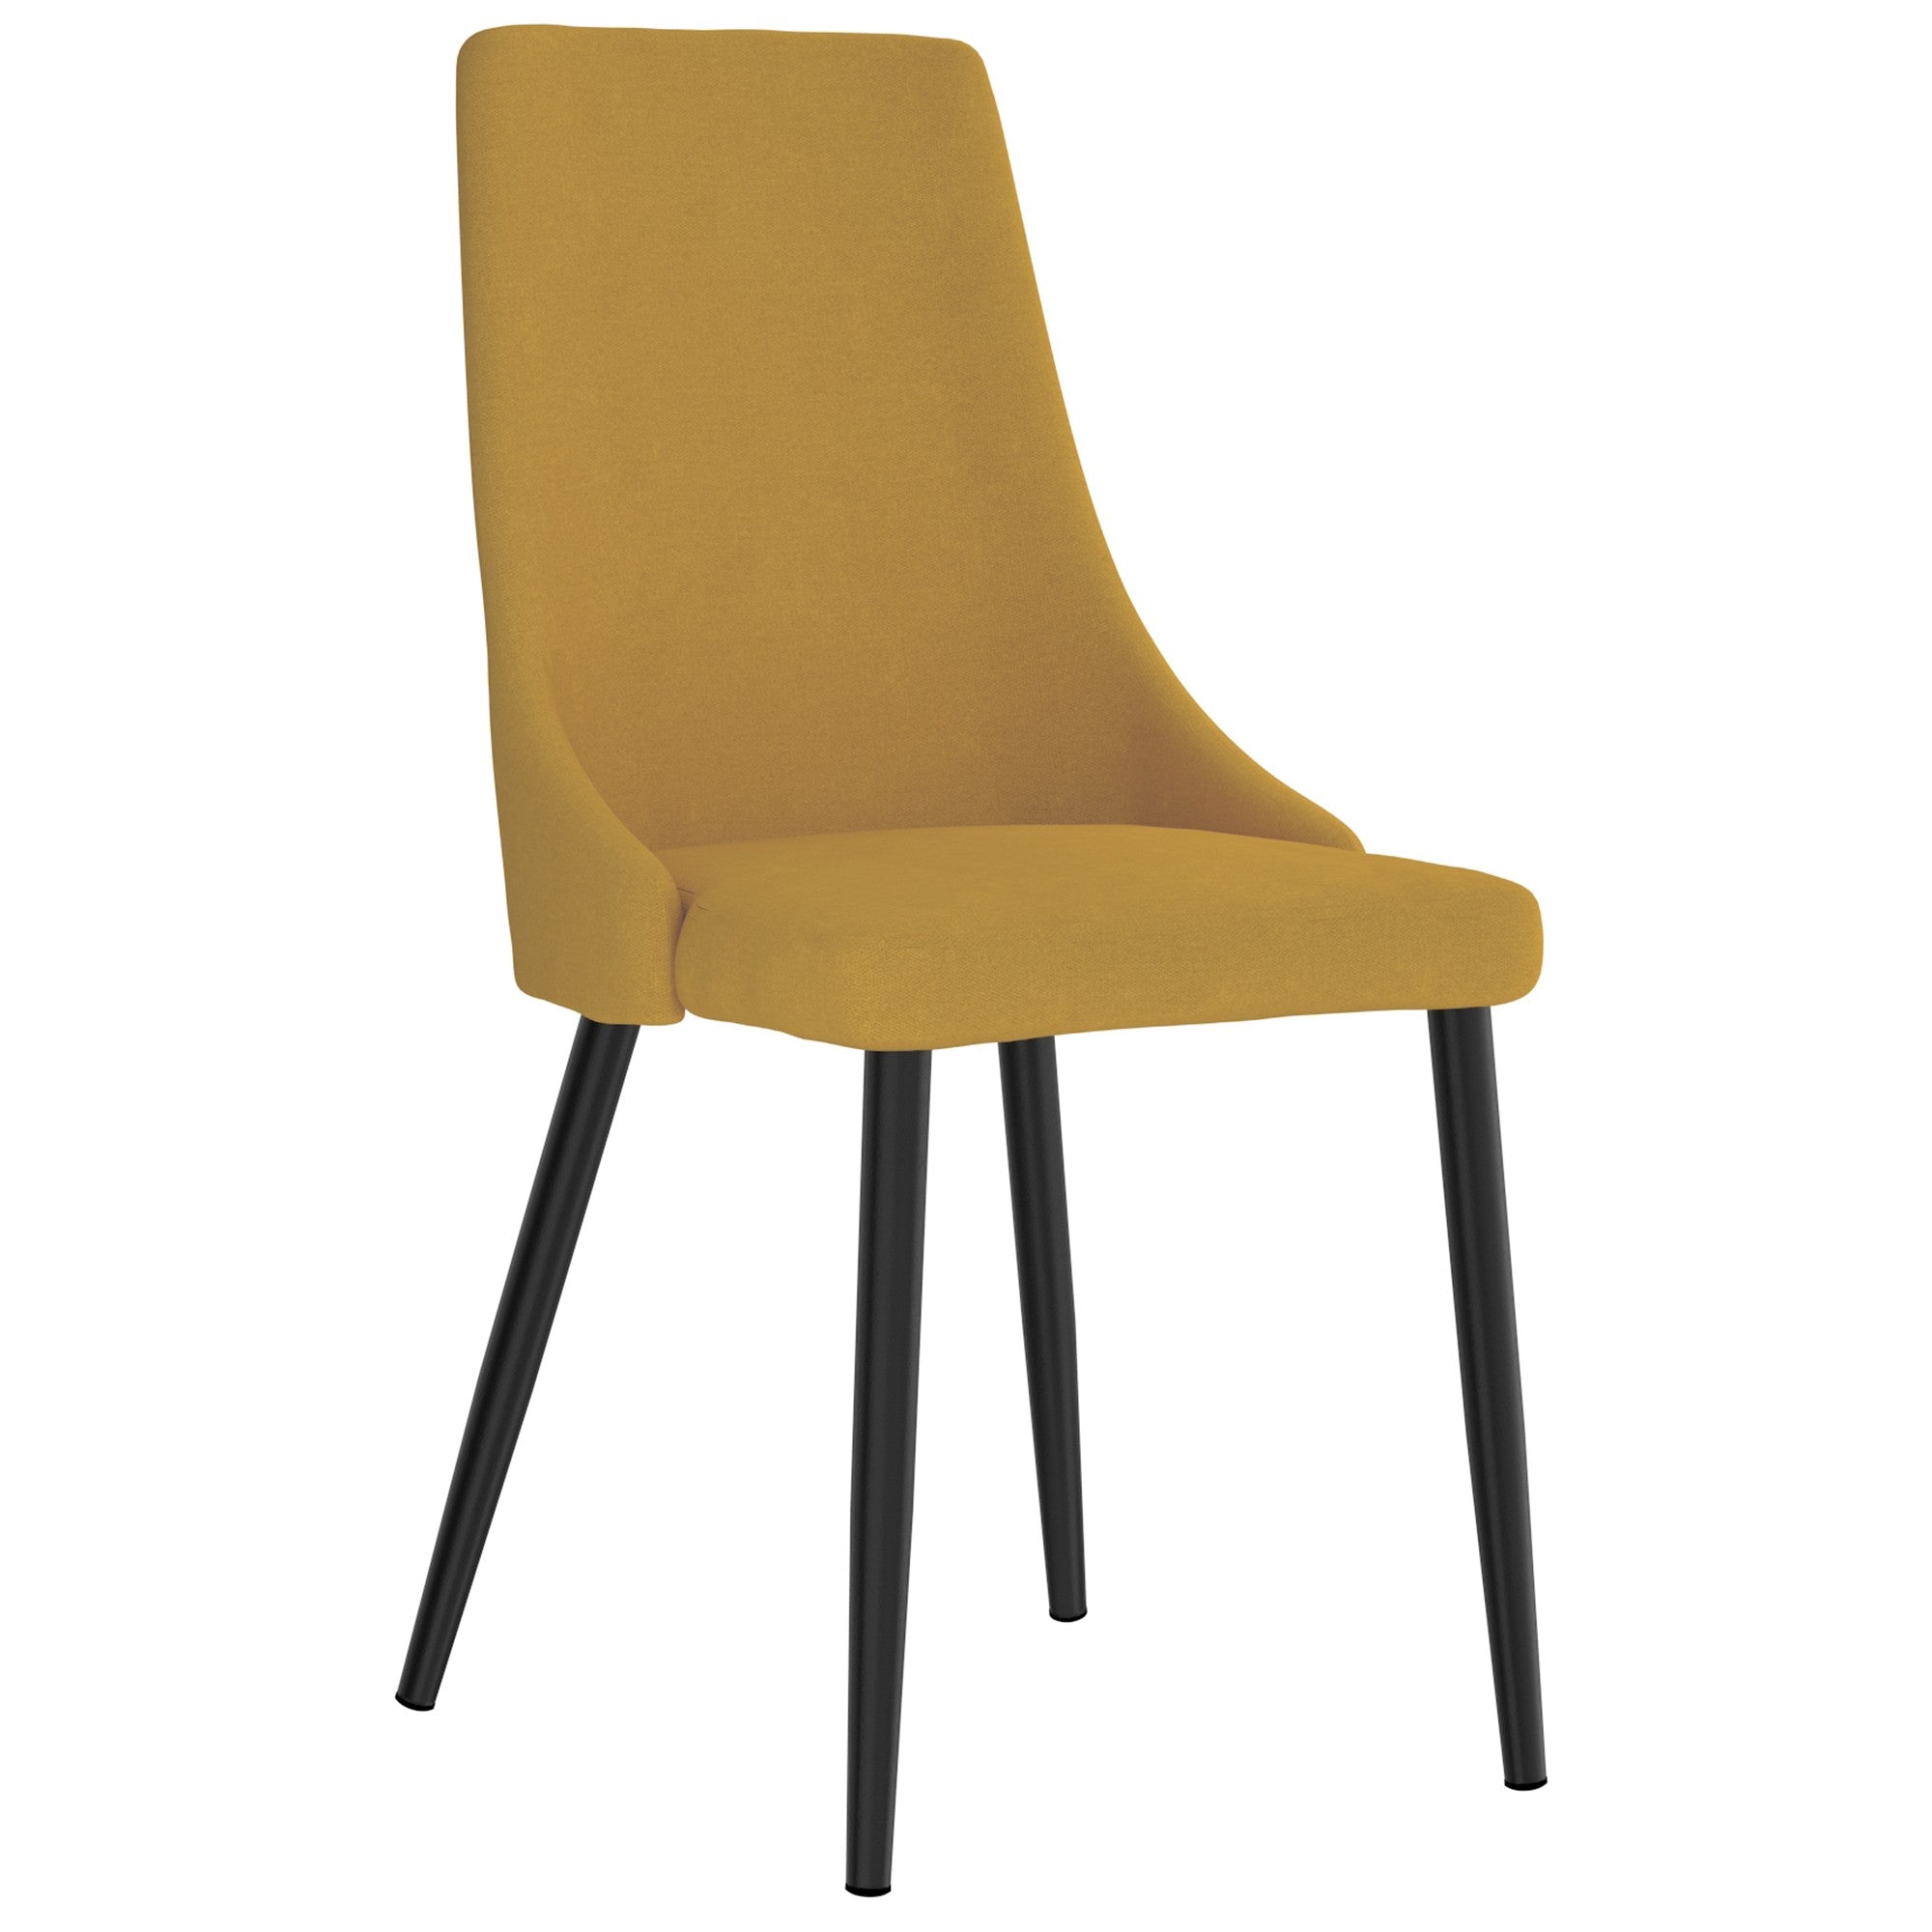 Venice Side Chair set of 2 in Mustard Price shown for each -